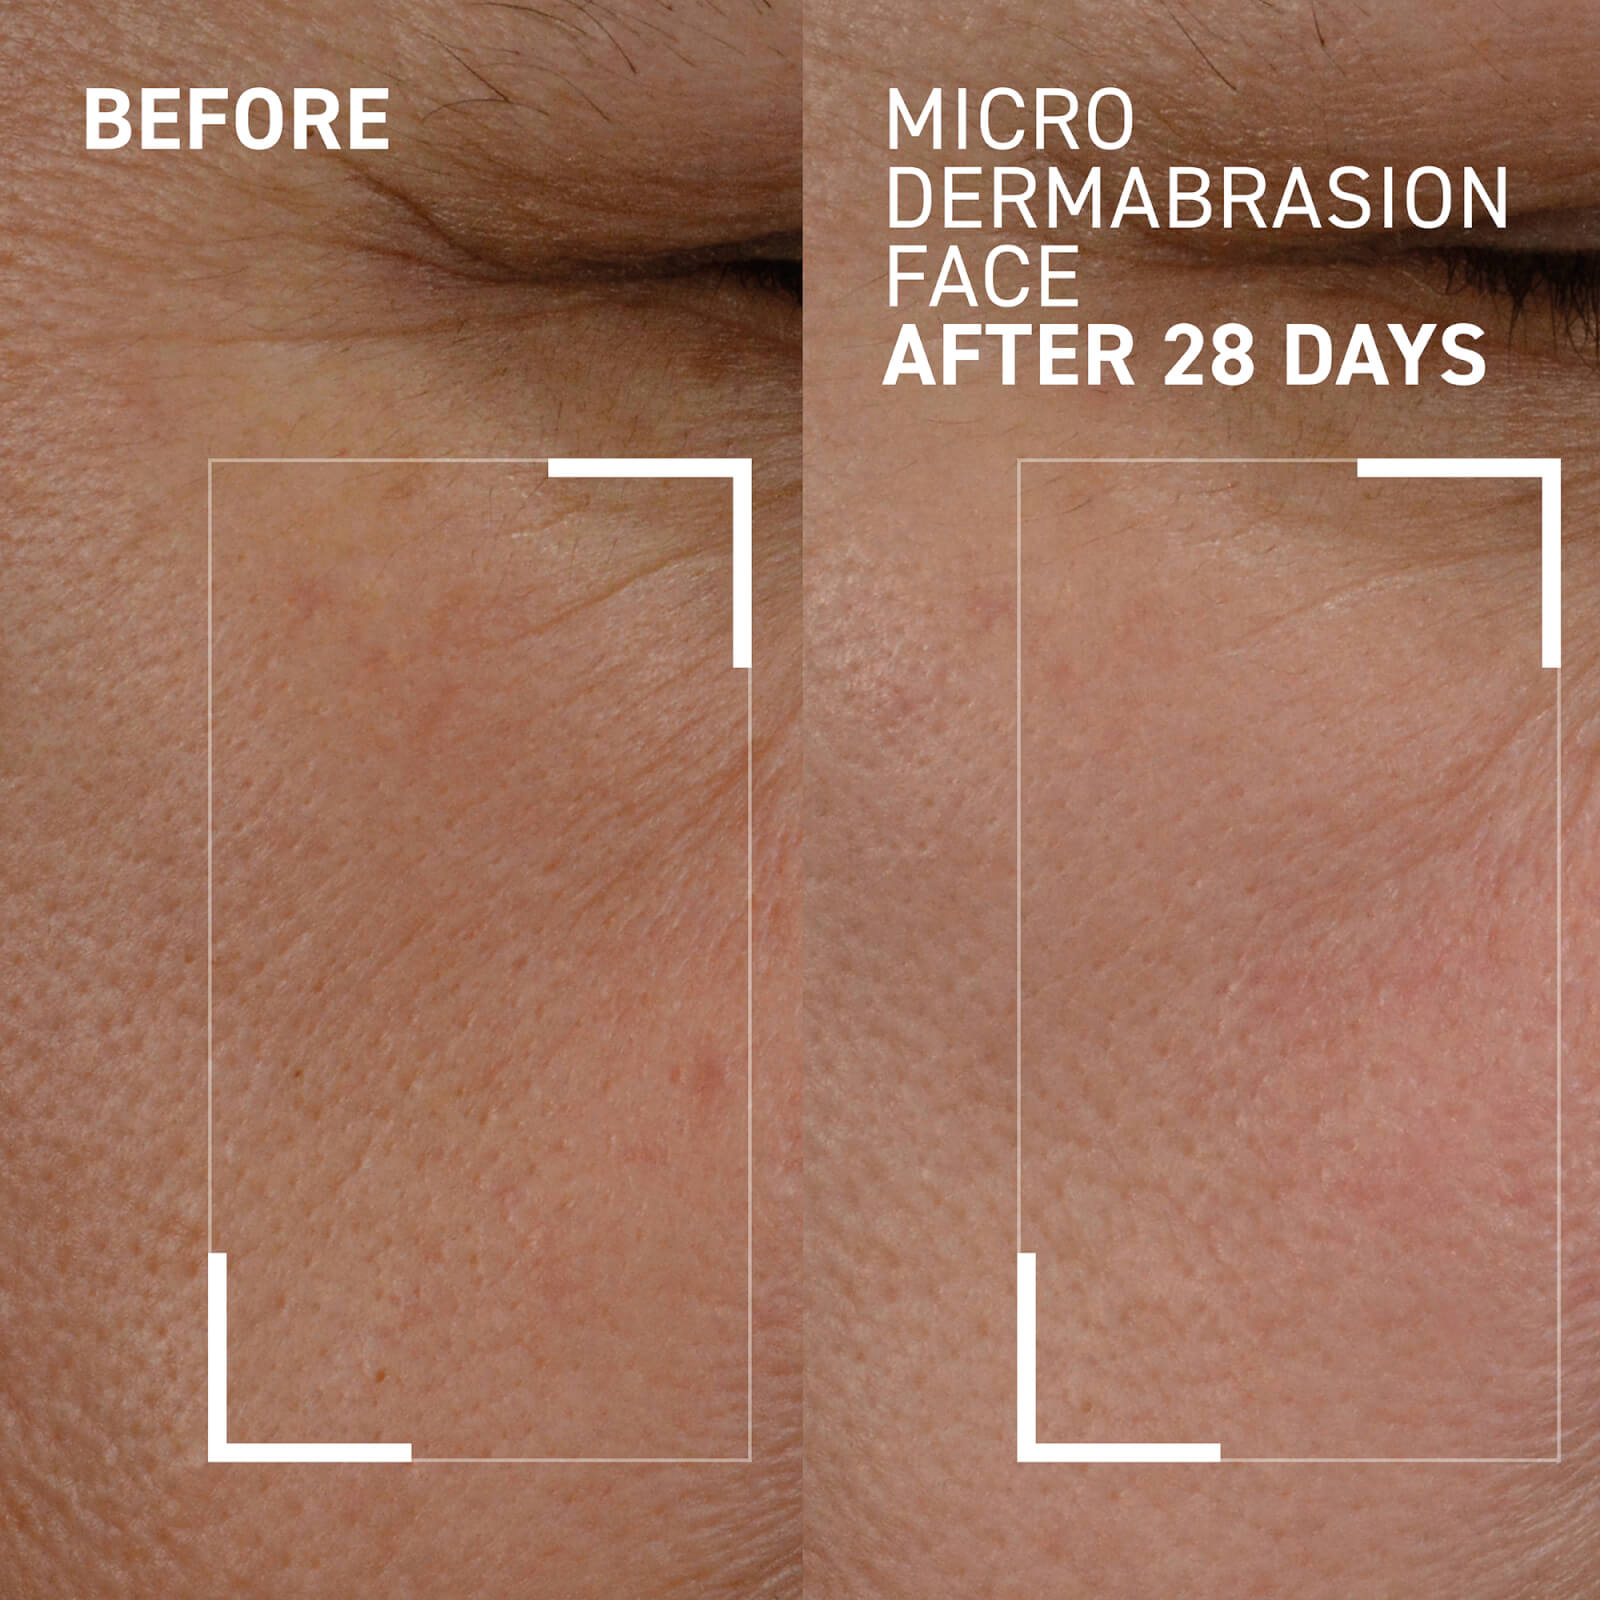 before microc dermbrasion face after 28 days